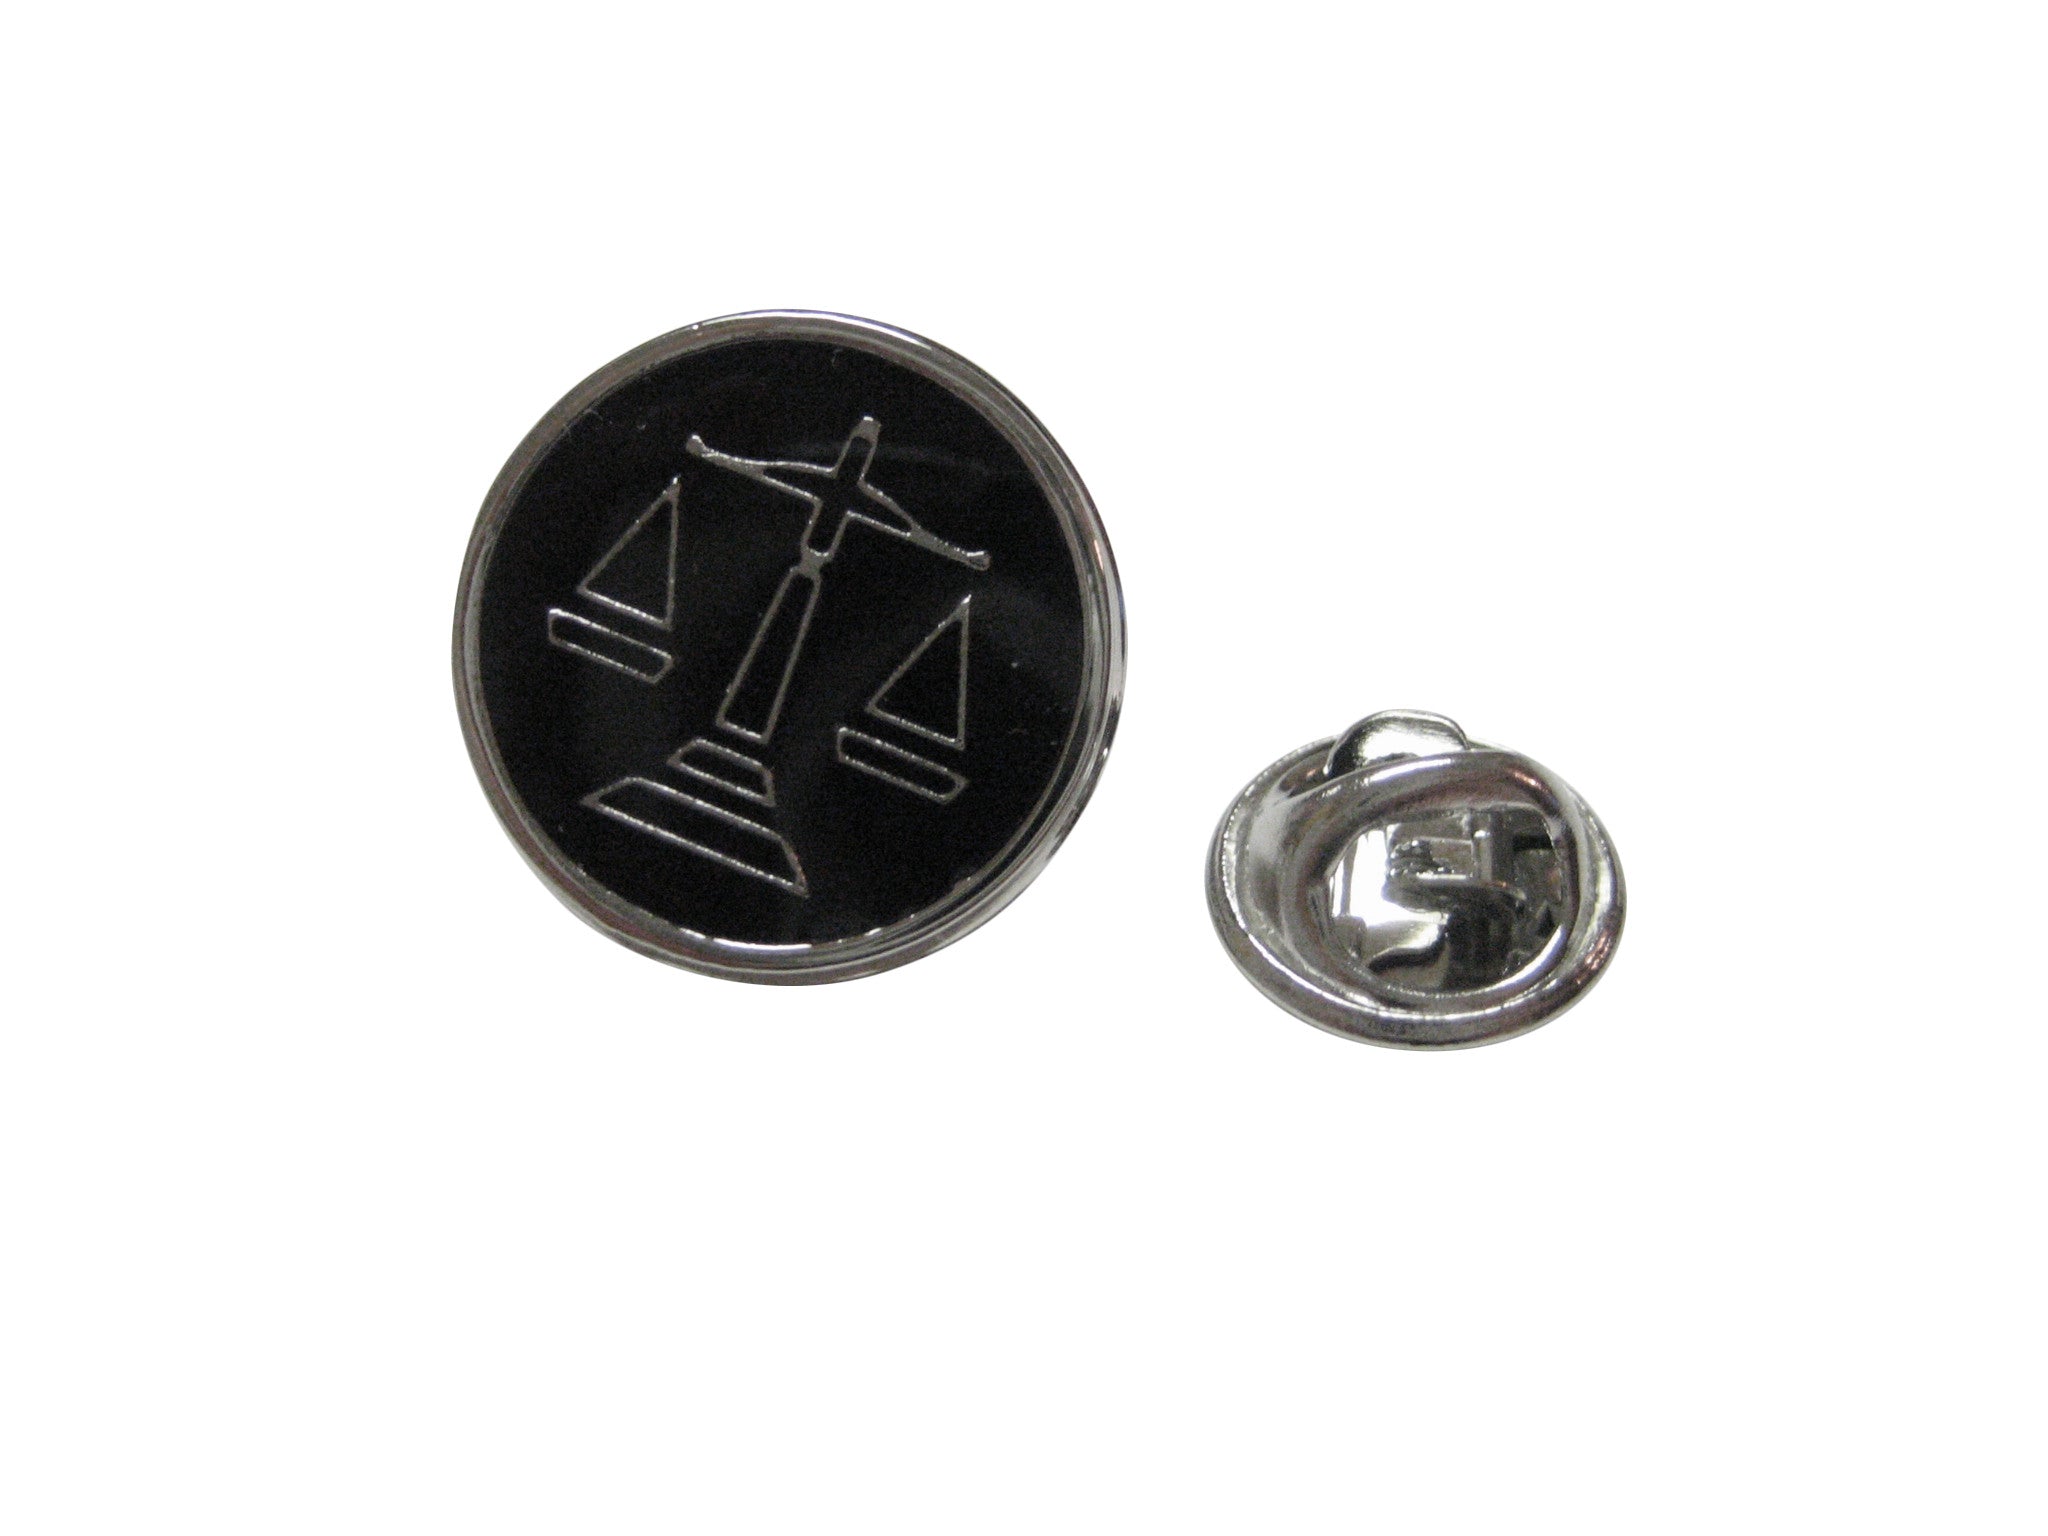 Black Scale of Justice Lapel Pin